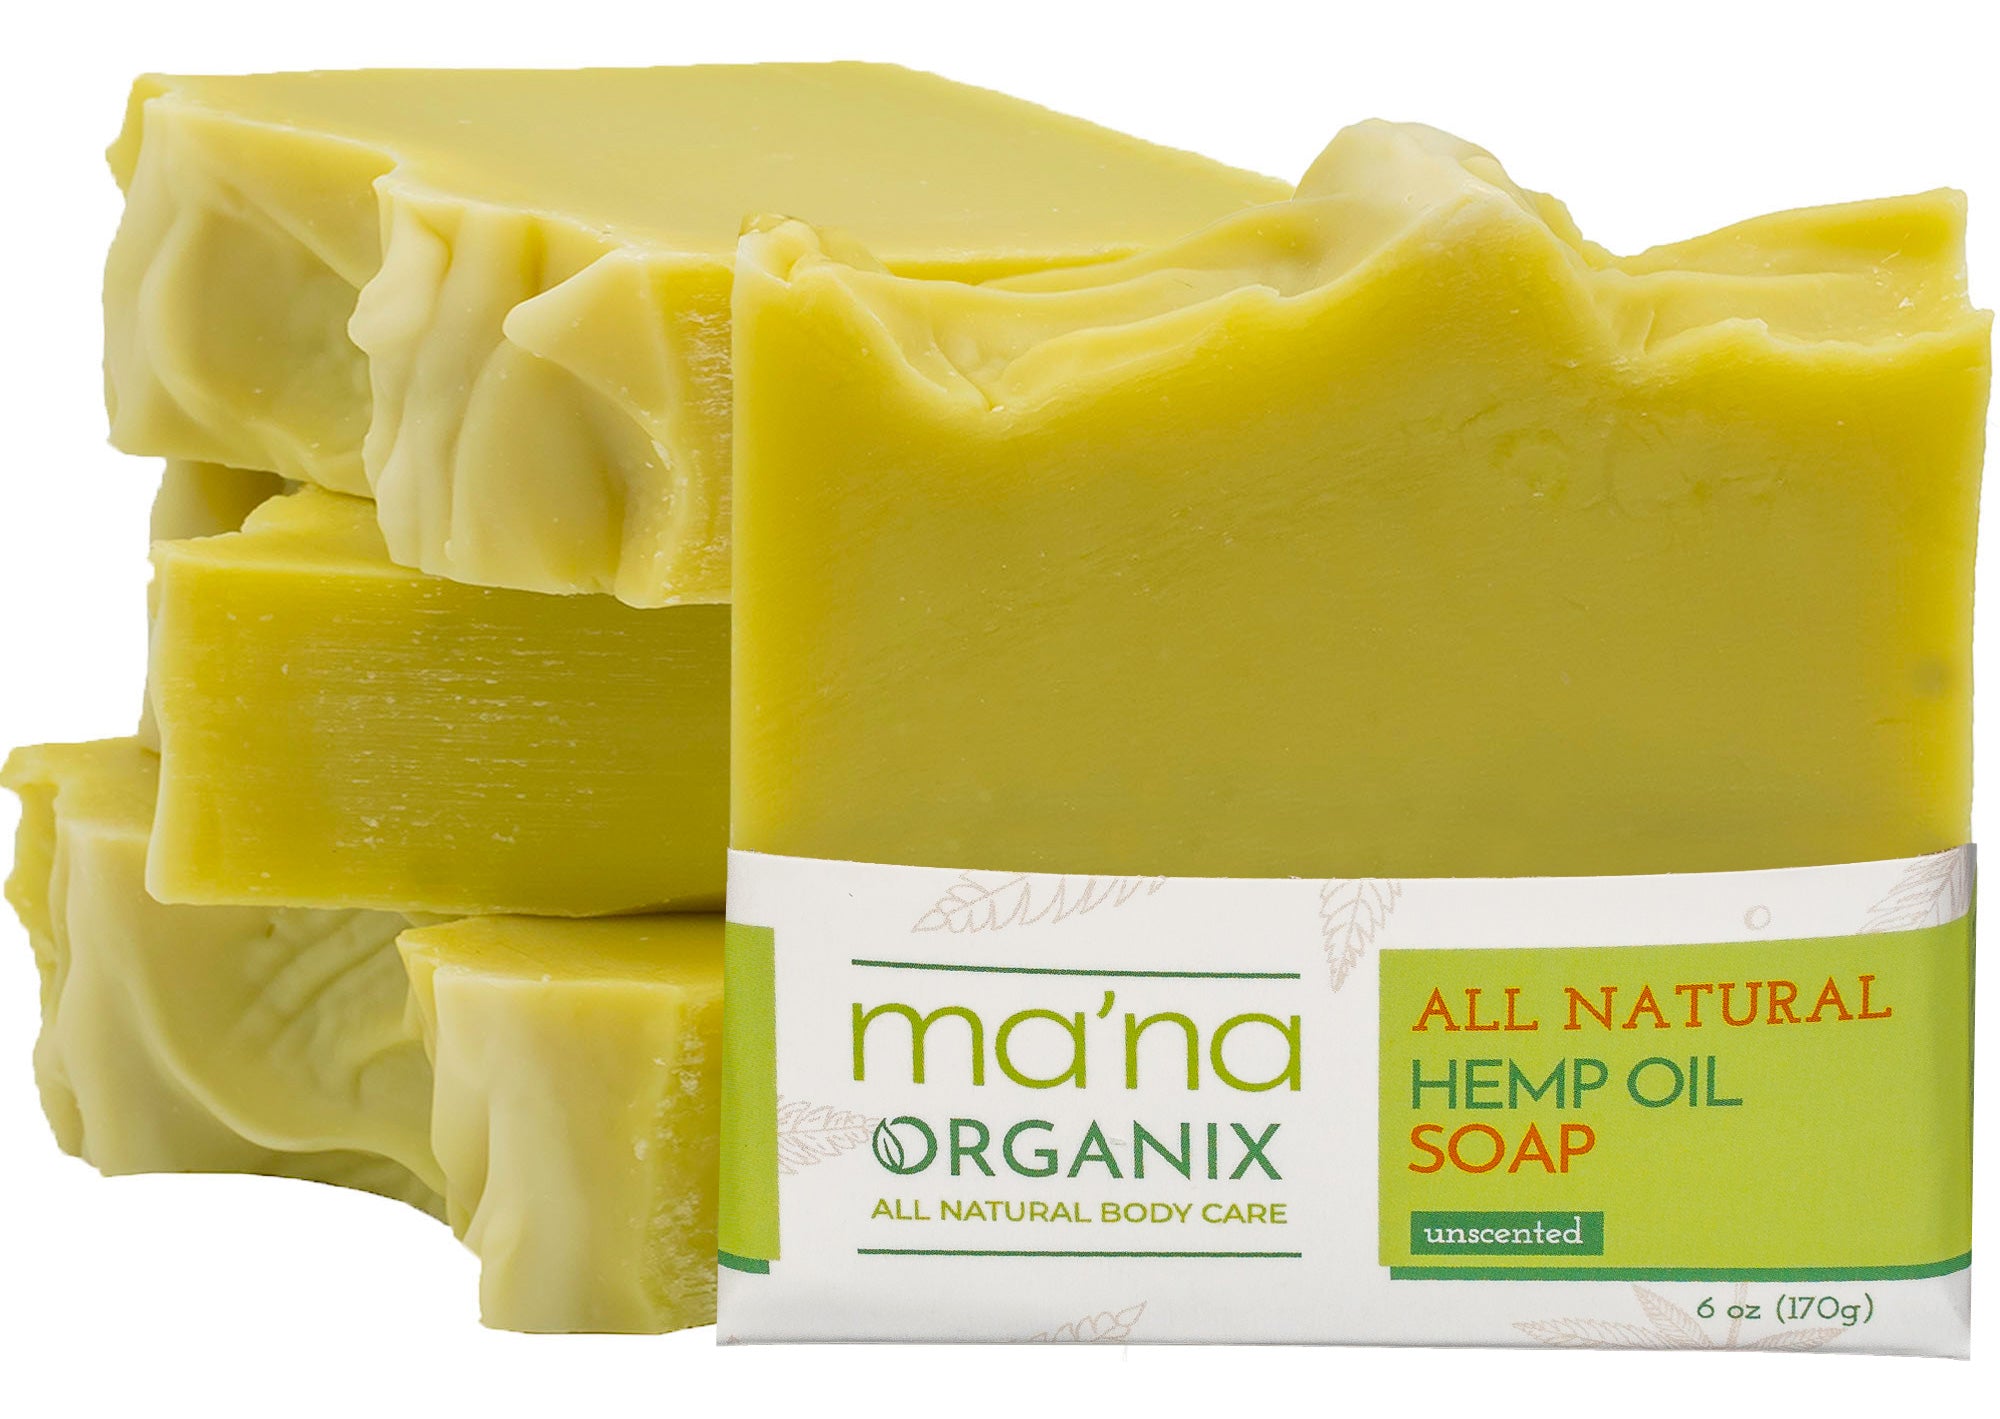 All Natural Hemp Oil Soap Bar with Ecofriendly and Biodegradable Packaging (6 oz.)